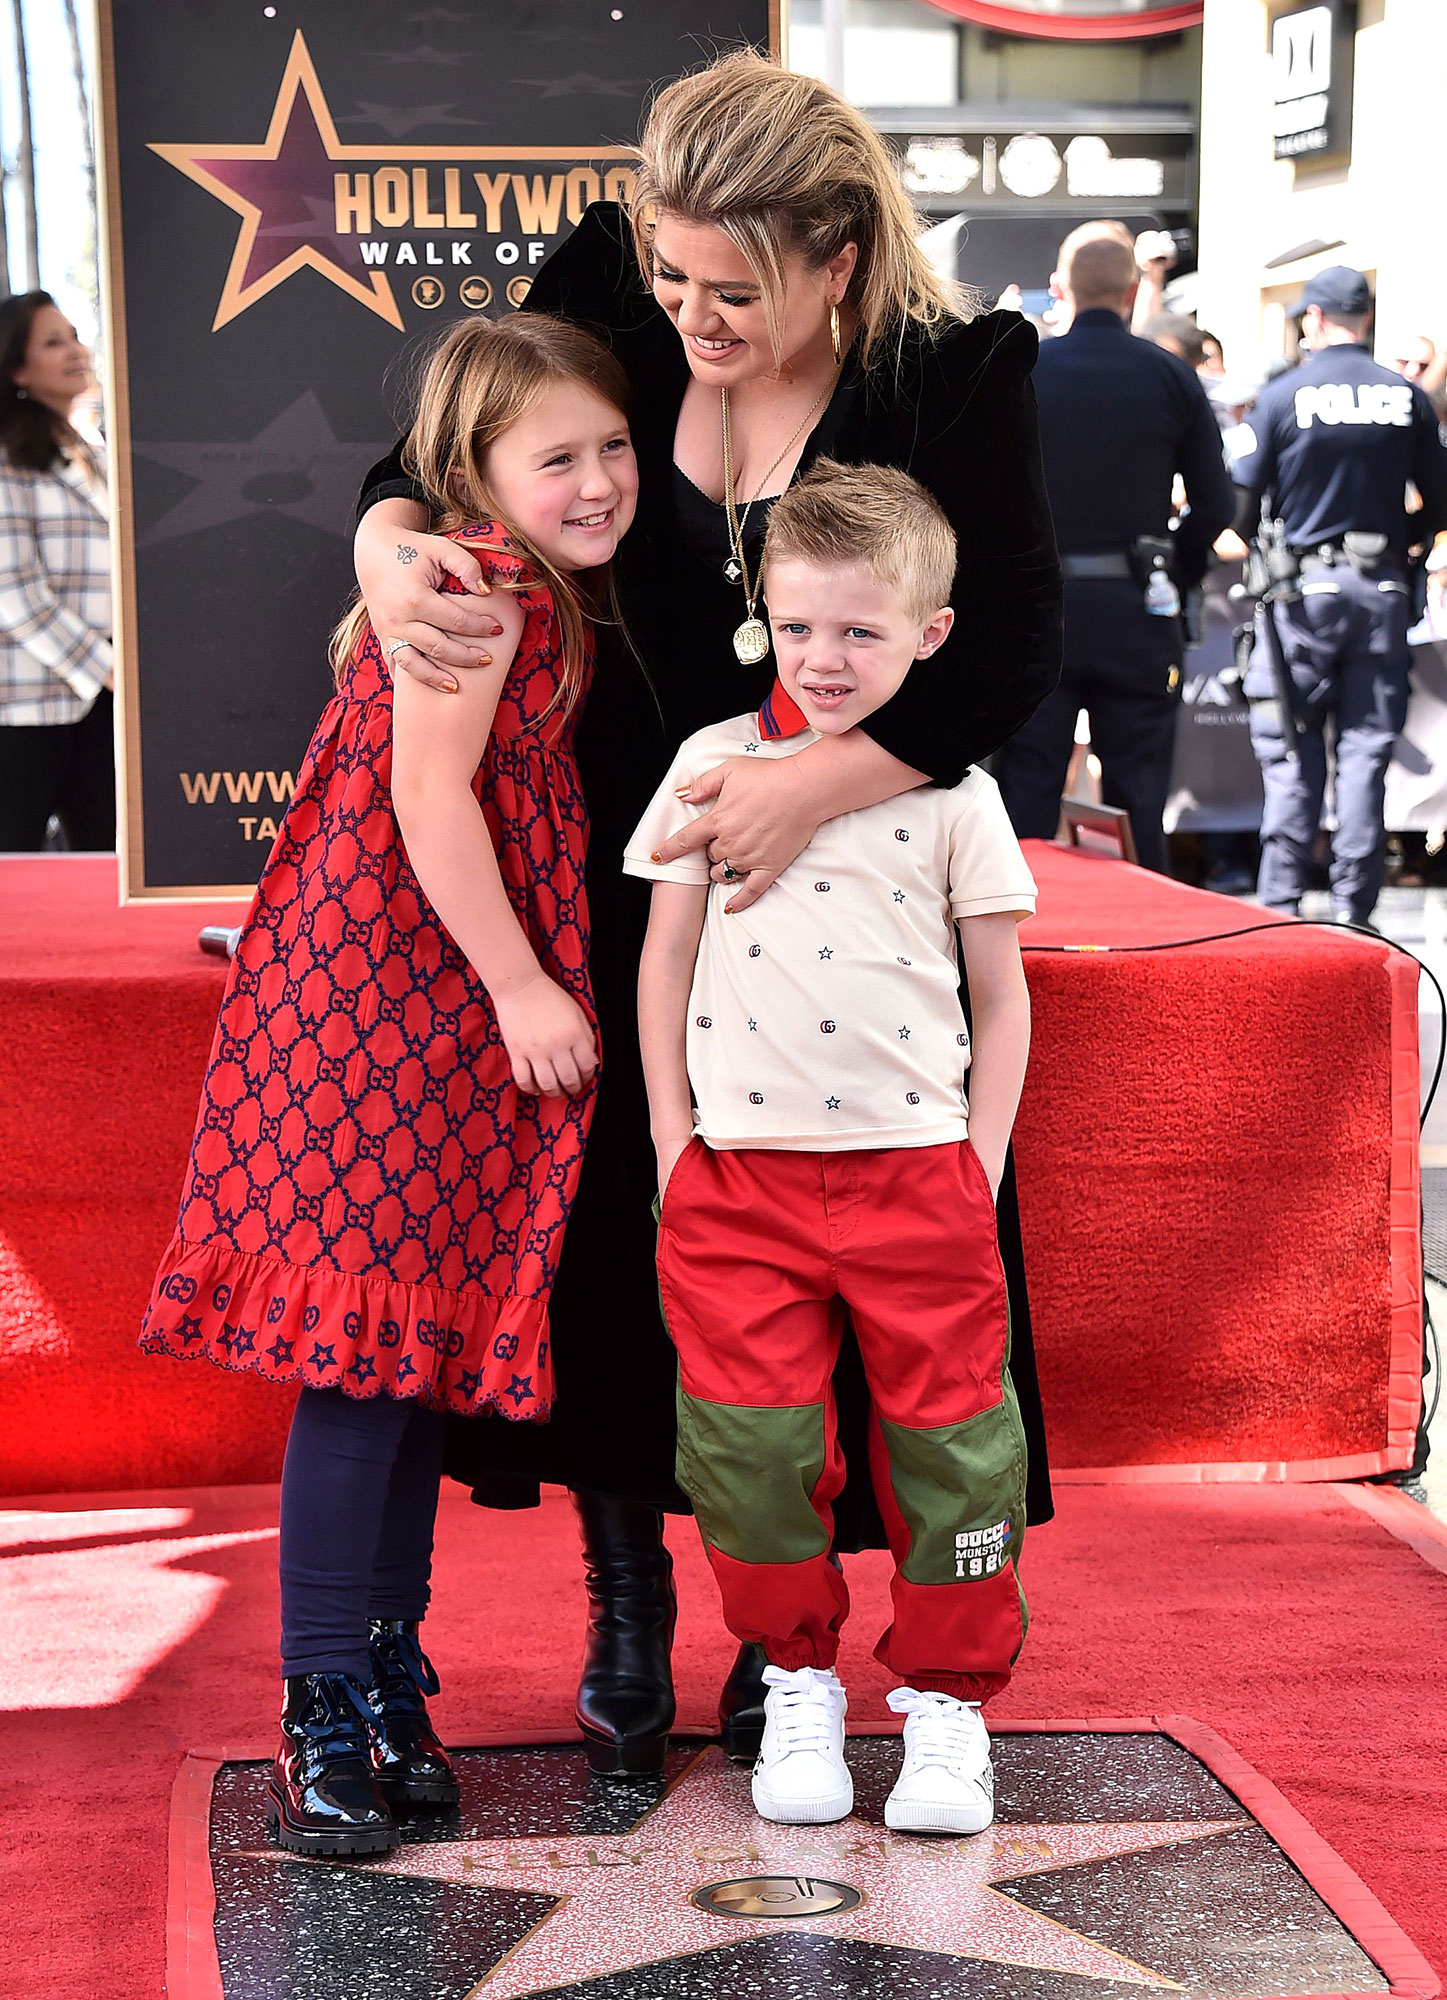 Kelly Clarkson Celebrates Her Hollywood Walk of Fame Star With Kids 3